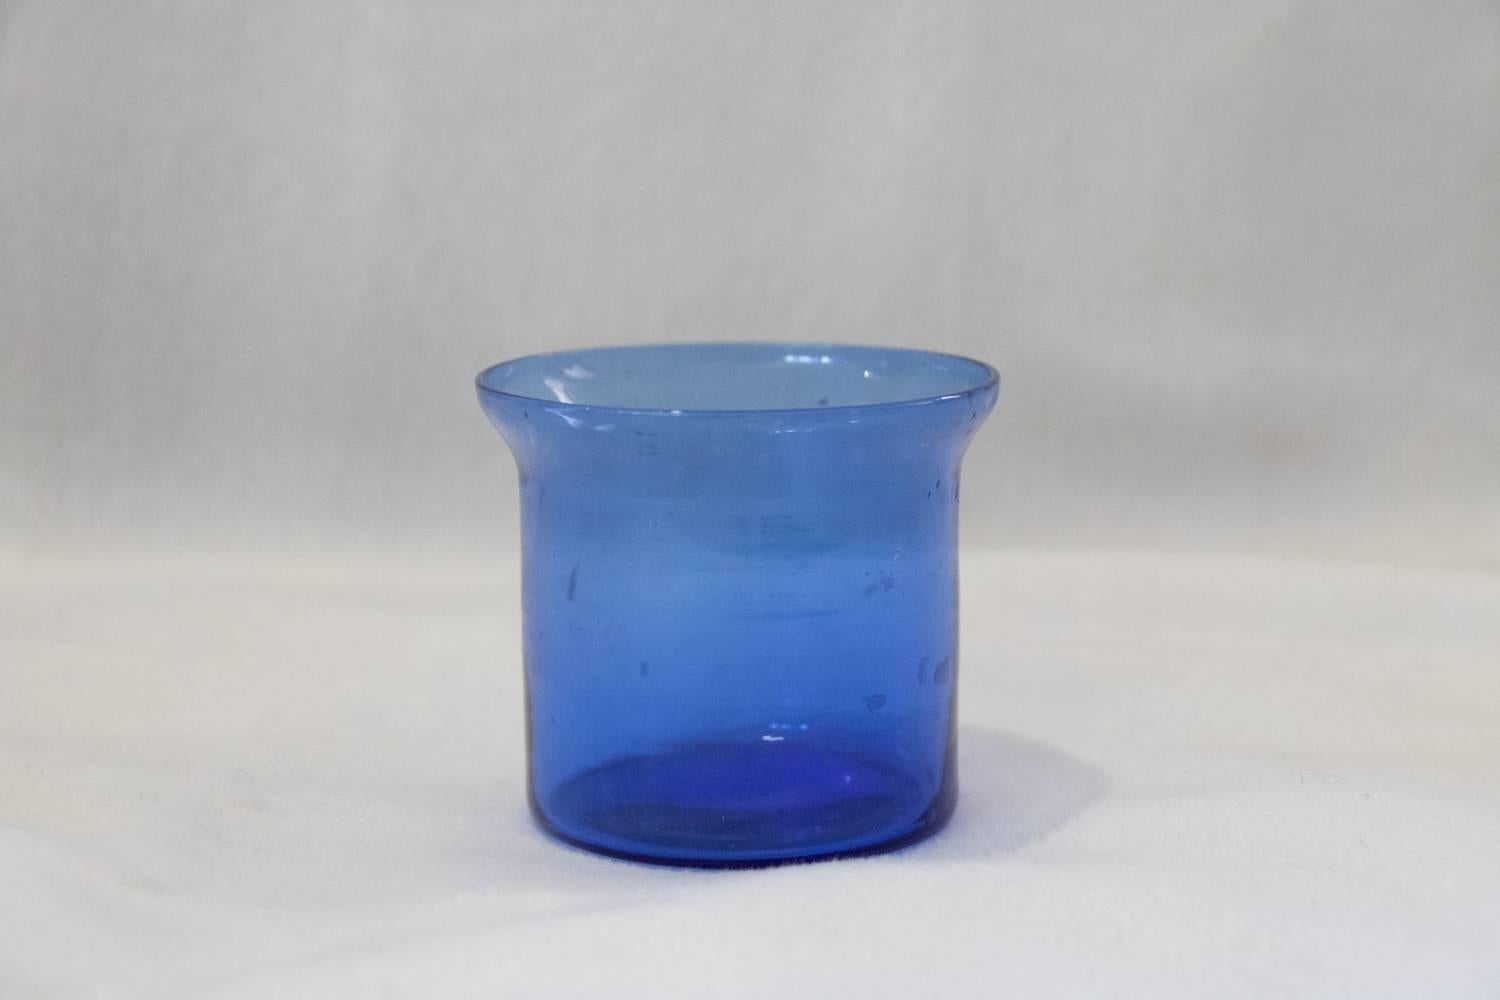 Set of Seven Glorious Blue Glass Vases Mixed Shaped Sizes and Designs Handblown 1